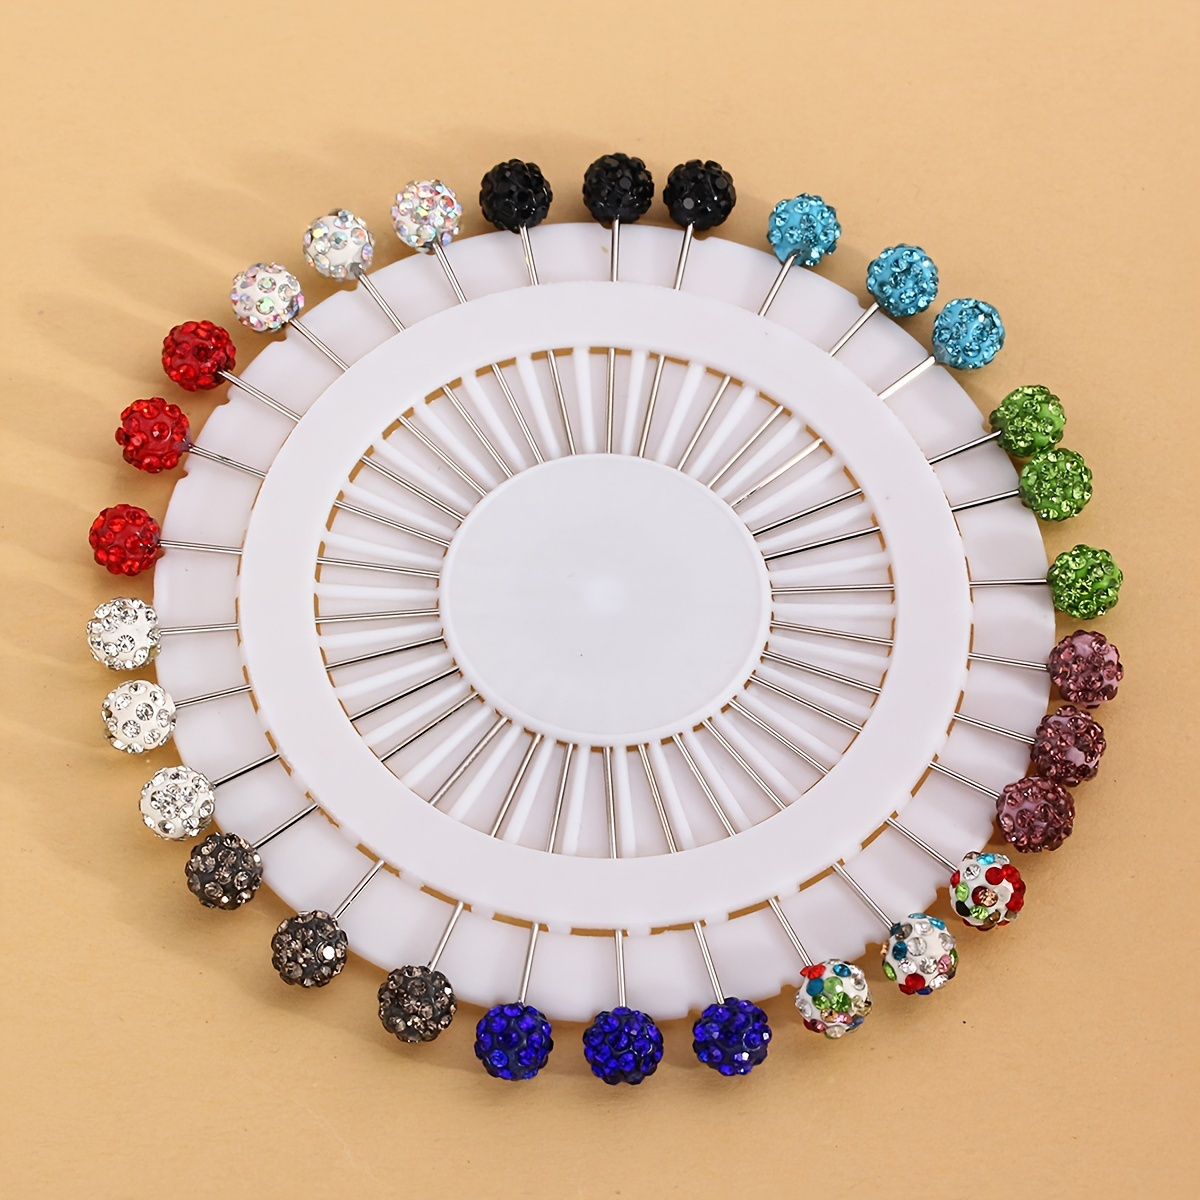 30PCS Hijab Pins with Safety Caps Colorful Crystal Rhinestone Ball